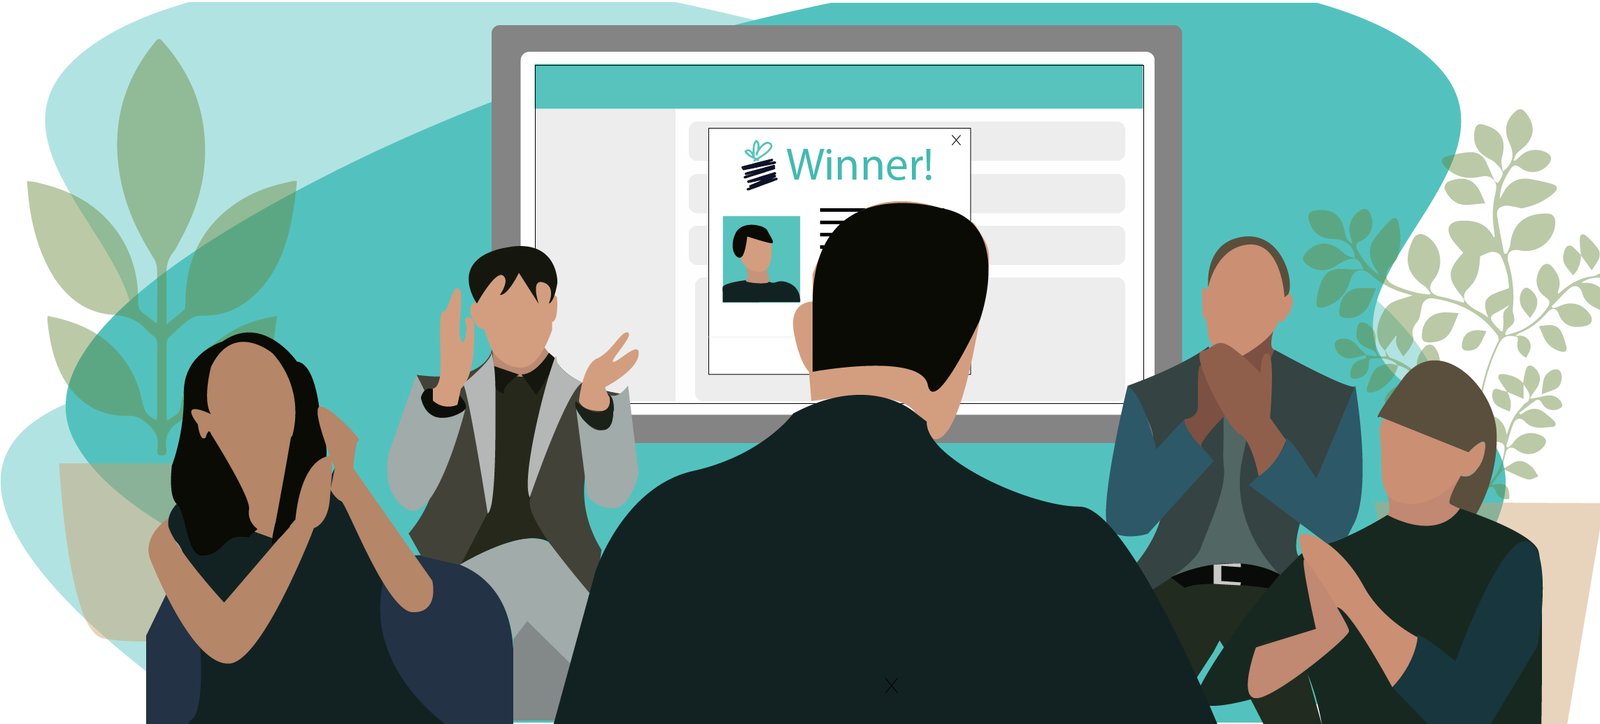 How to Build an Impactful Employee Recognition Program